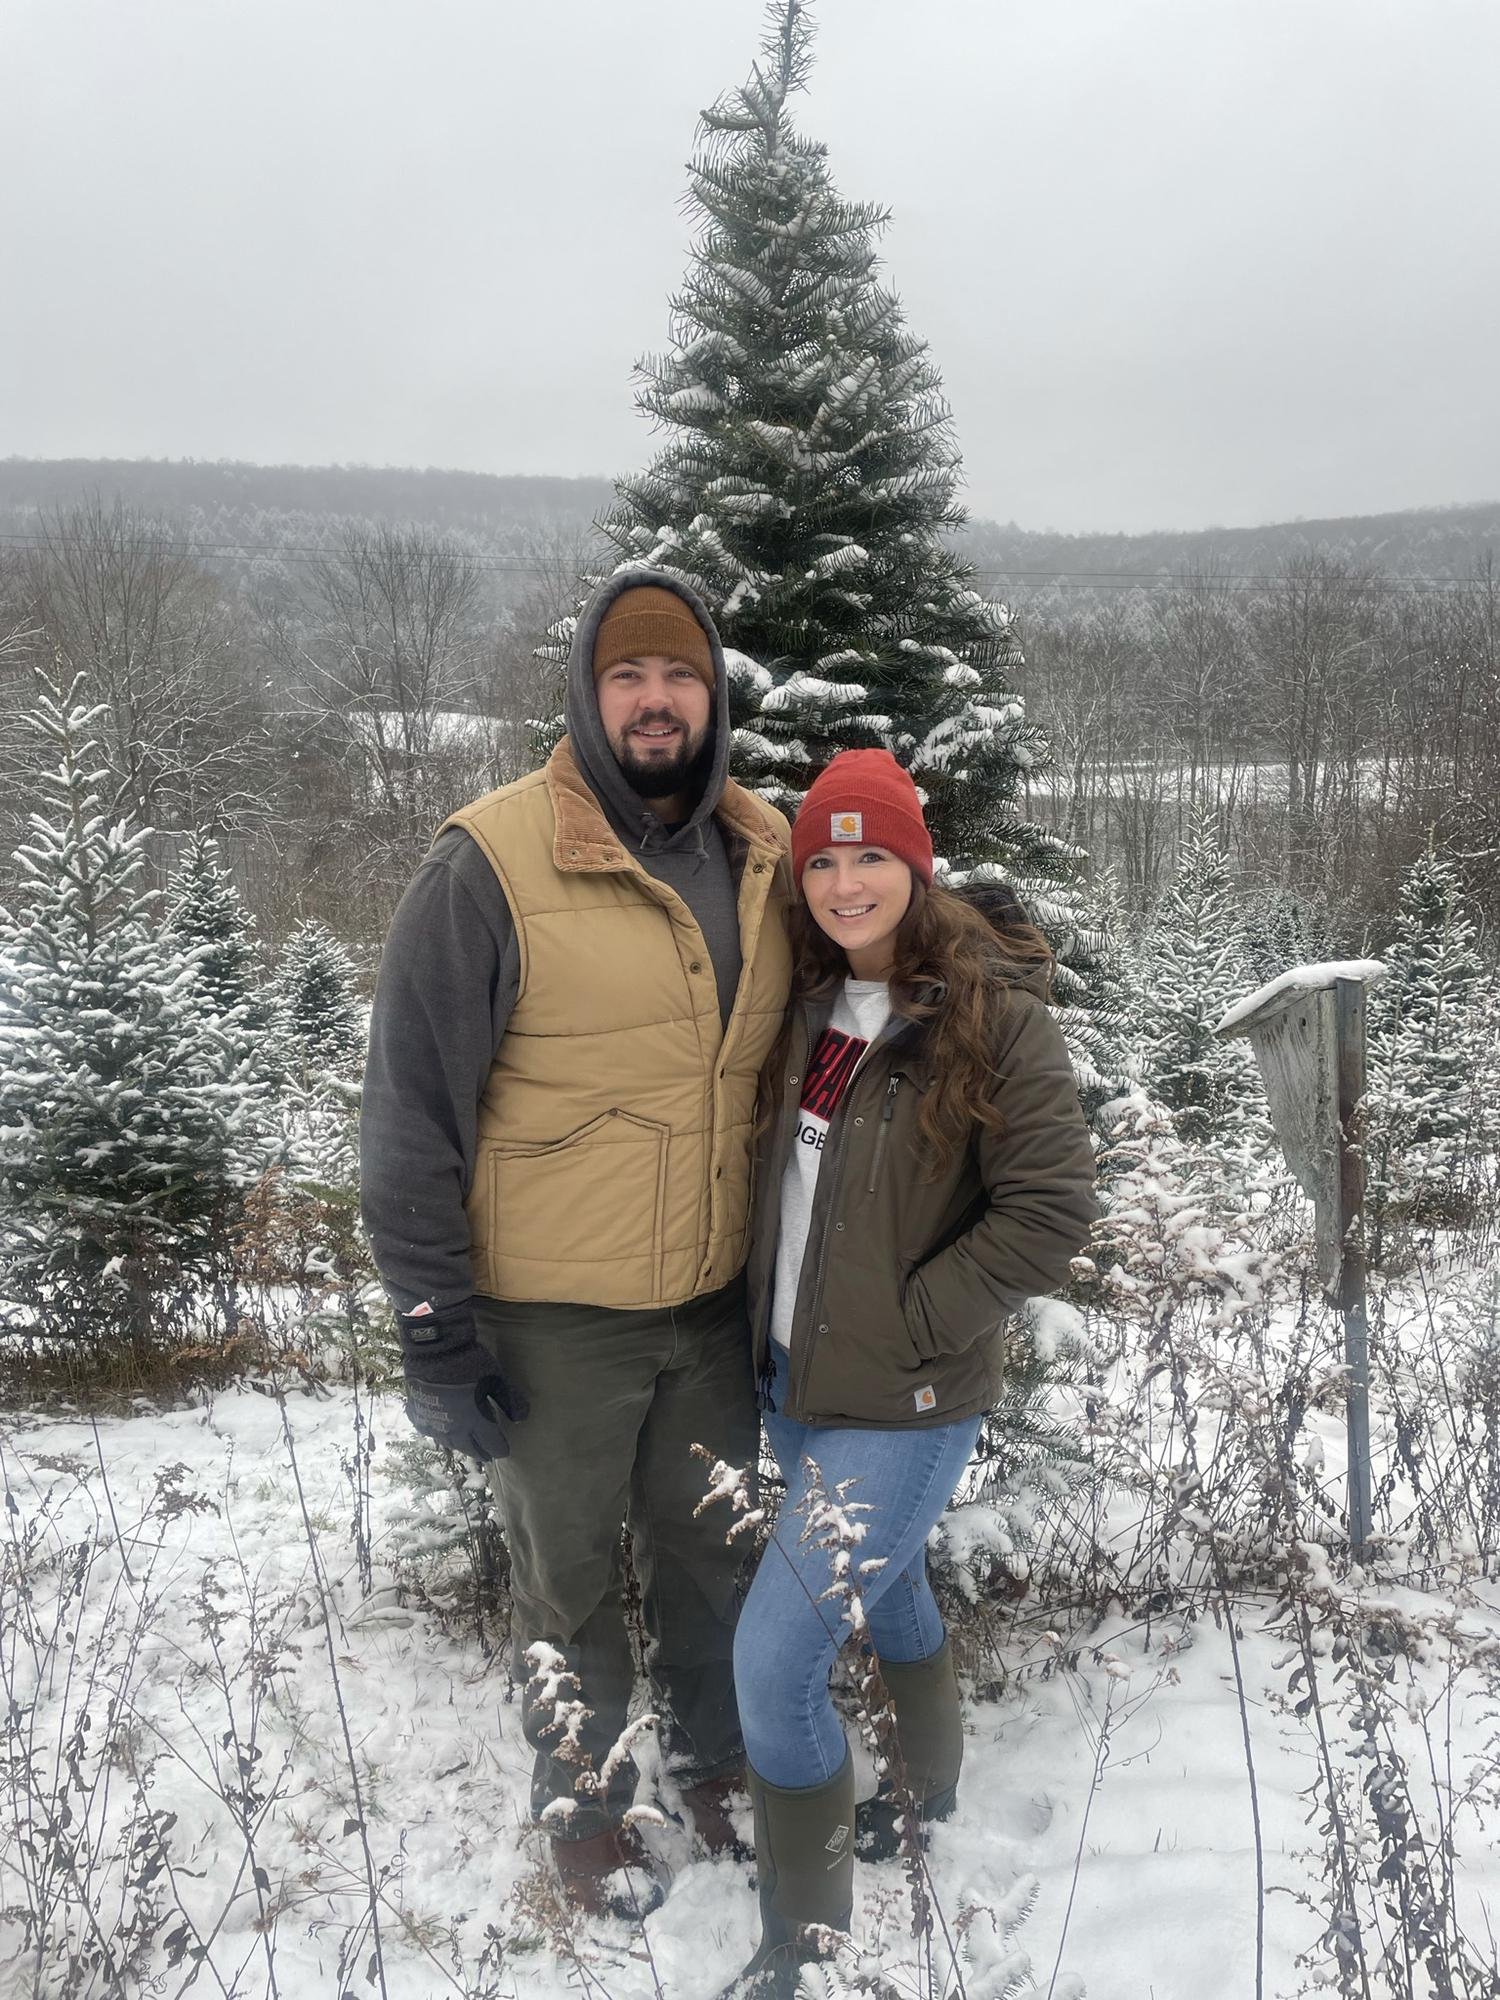 We purchased our home together in 2018 and since then have filled it with lots of love, a Christmas tree every year…